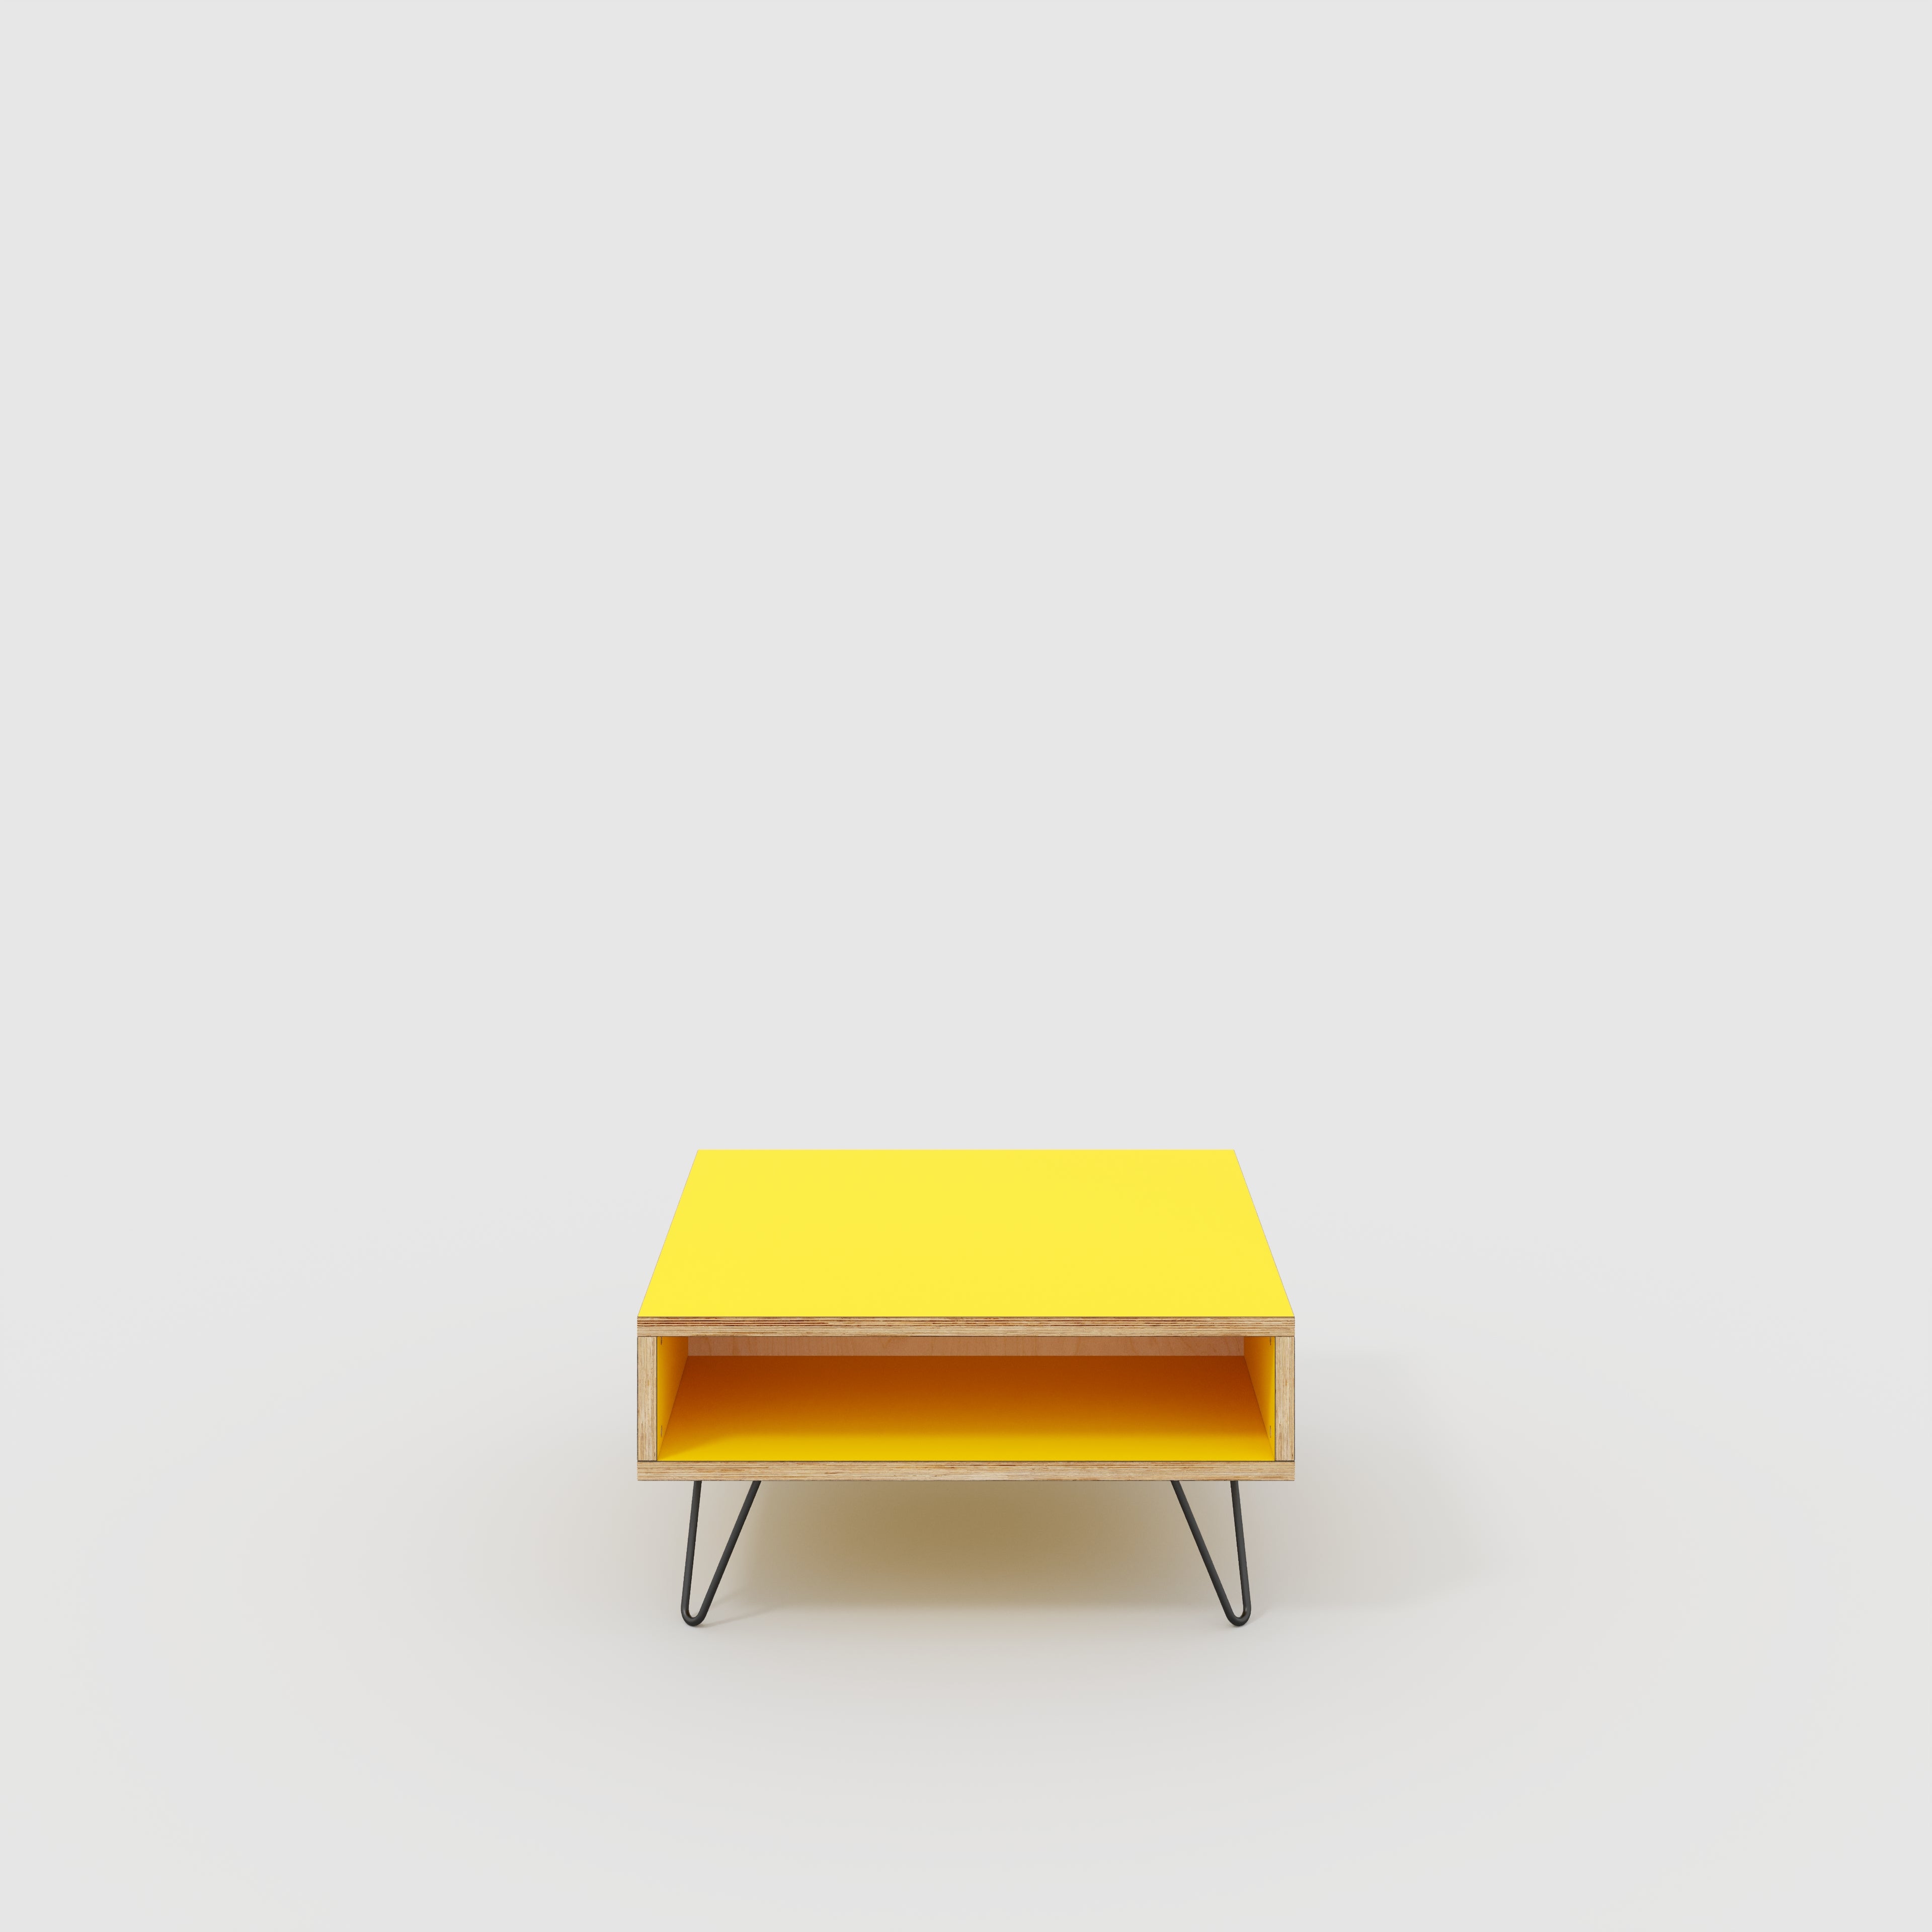 Coffee Table with Box Storage and Black Hairpin Legs - Formica Chrome Yellow - 800(w) x 800(d) x 400(h)